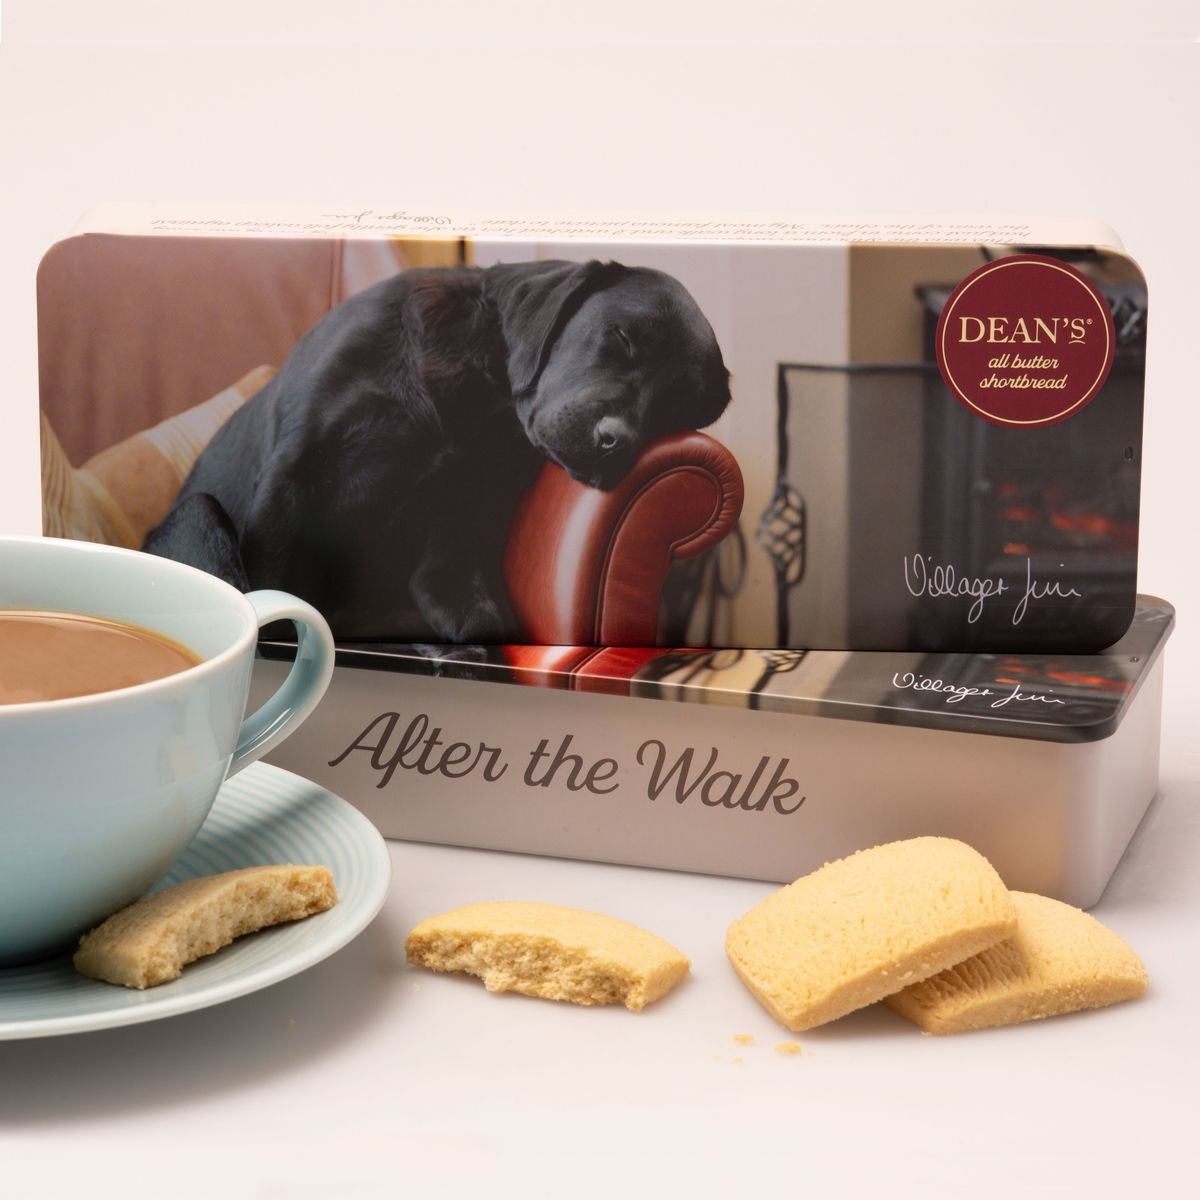 Buy the Villager Jim "After the Walk" Shortbread Squares 180g online at Dean's